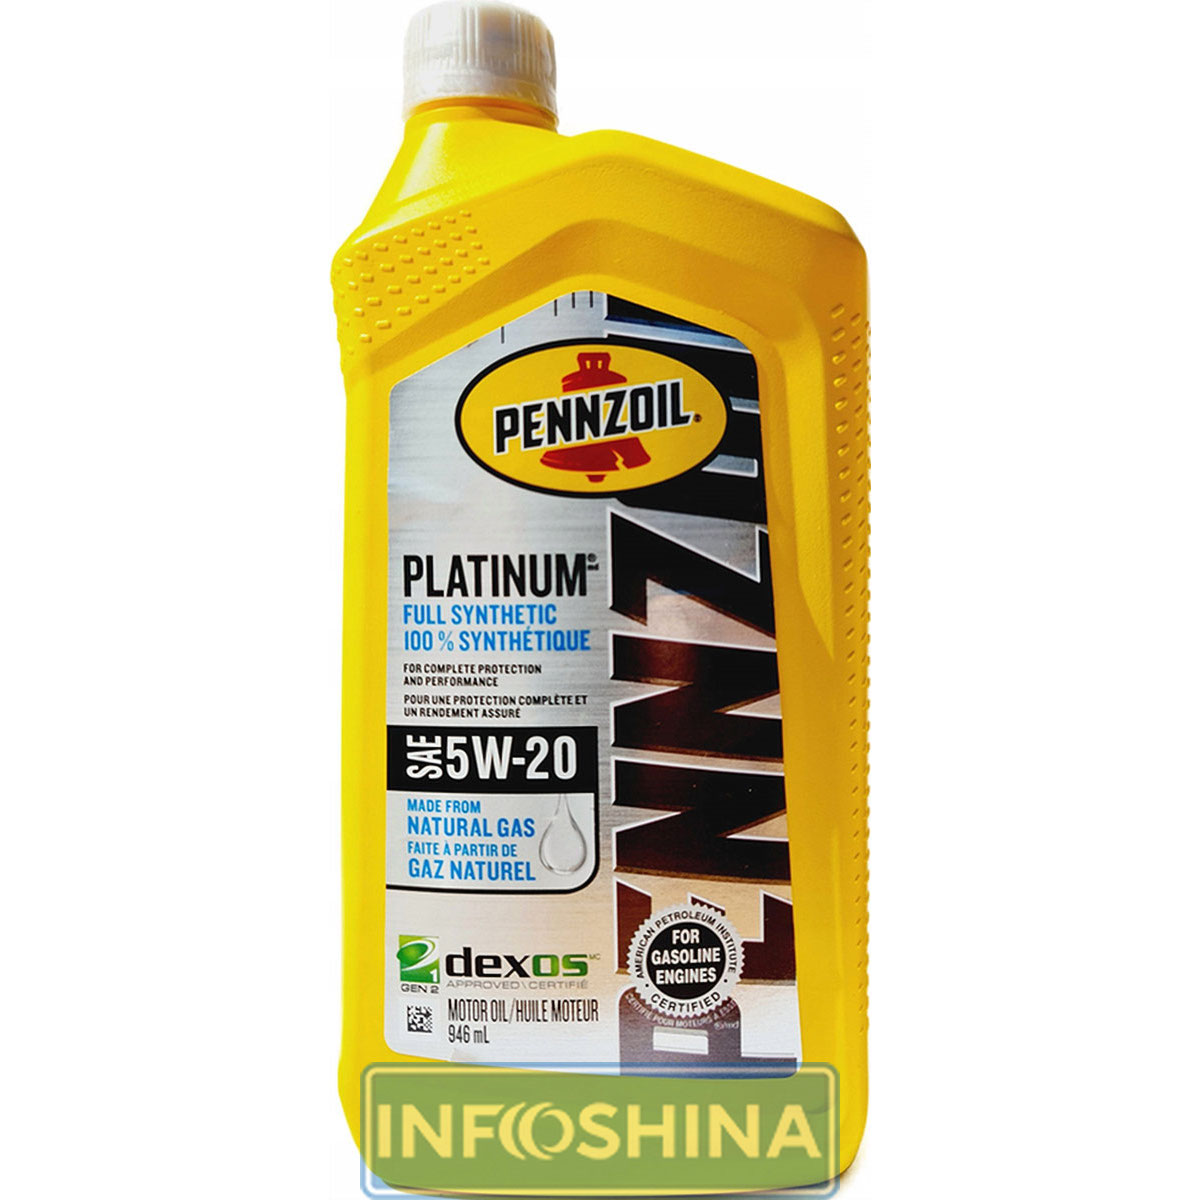 Pennzoil Platinum Fully Synthetic 5W-20